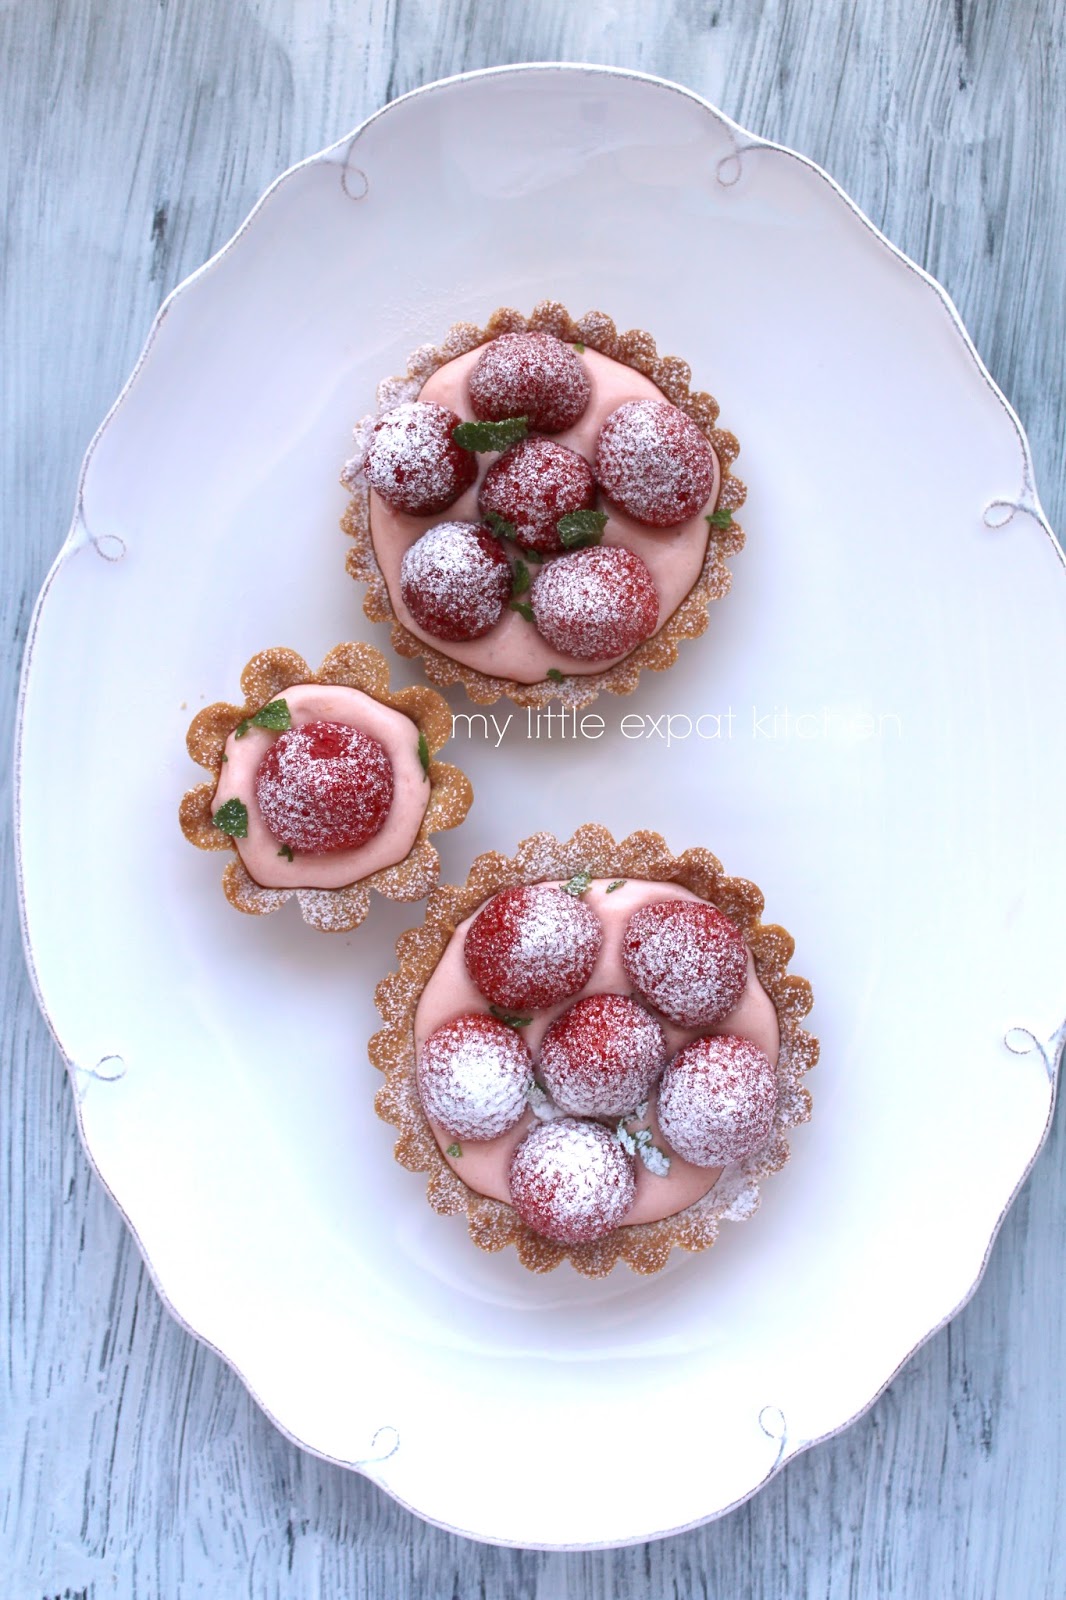  strawberry tartlets (with strawberry crème légère and fresh strawberries)